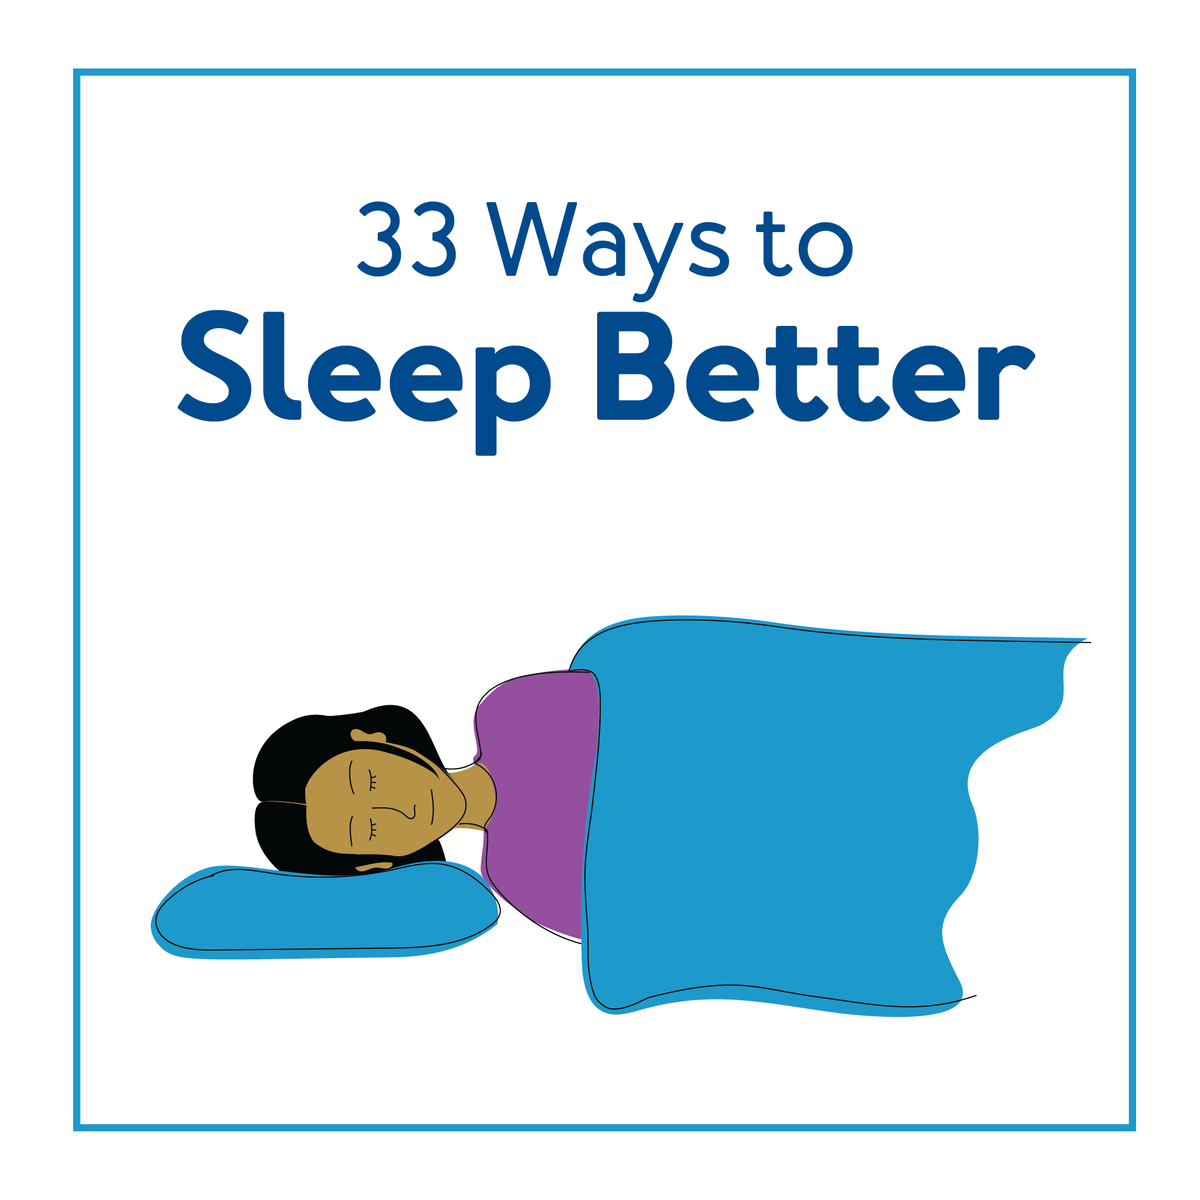 A cover image of a cartoon person sleeping. Text, “33 Ways to Sleep Better”